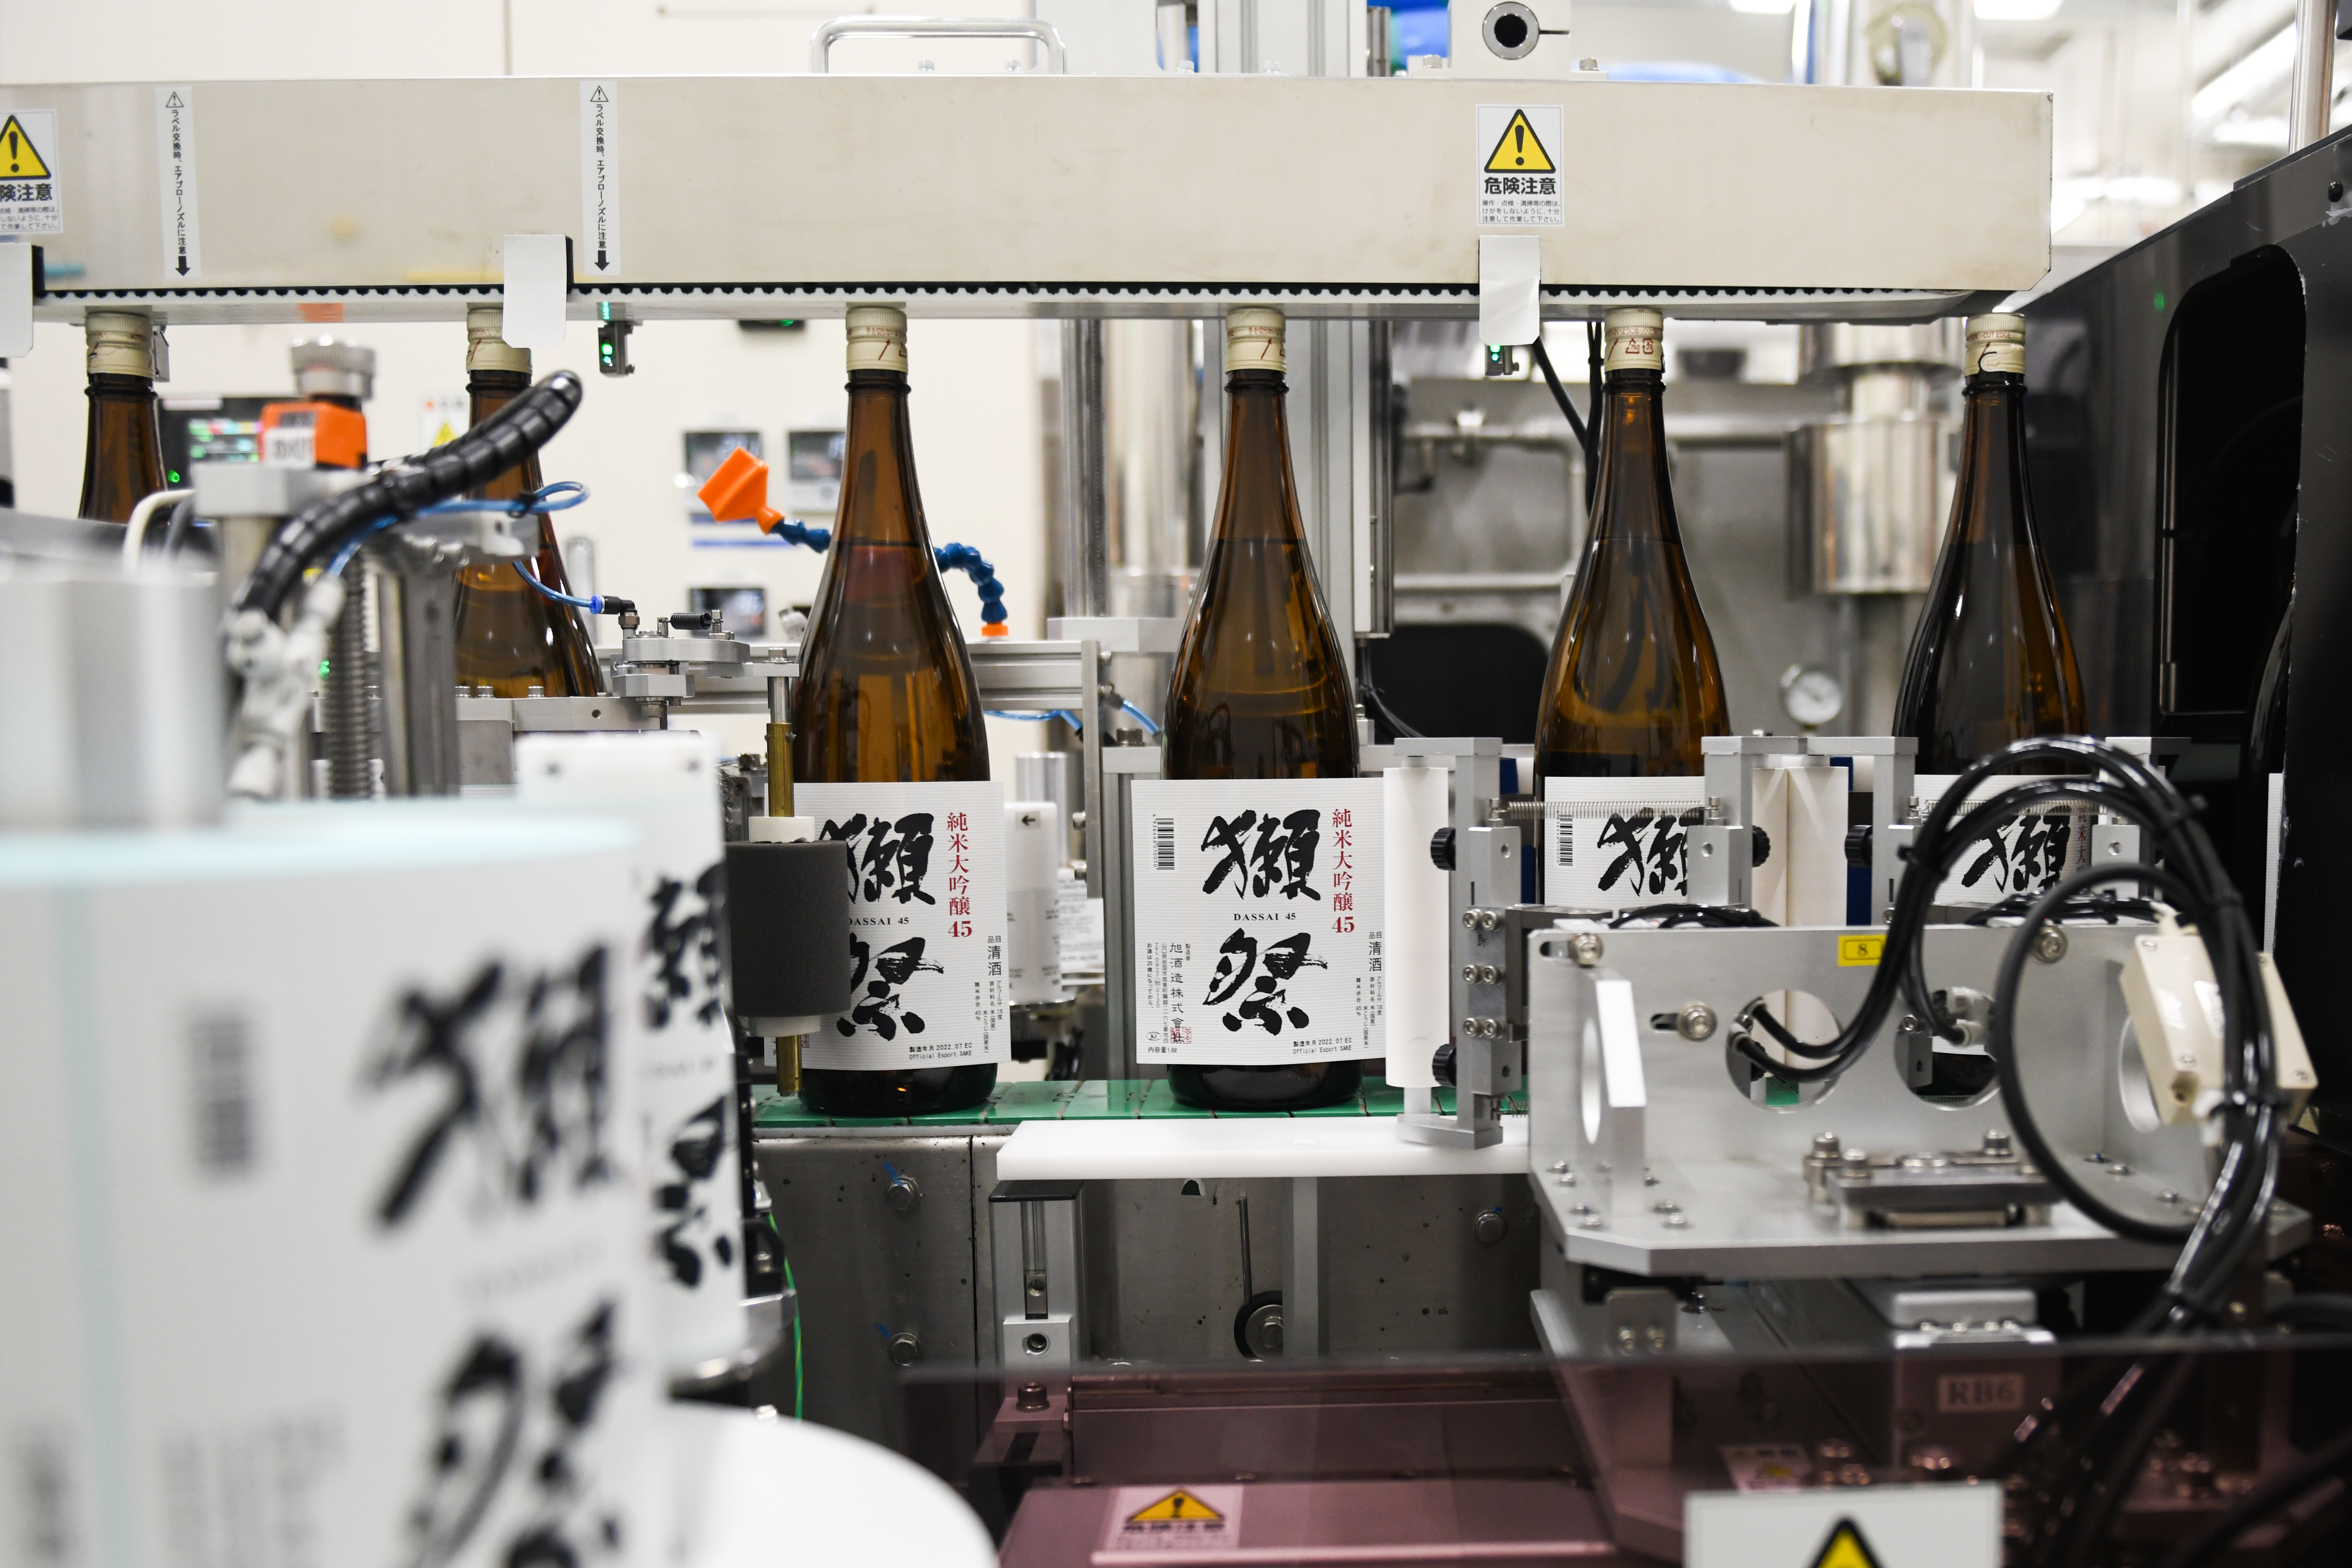 Bottles of sake from the company Asahi Shuzo are packaged on an assembly line.